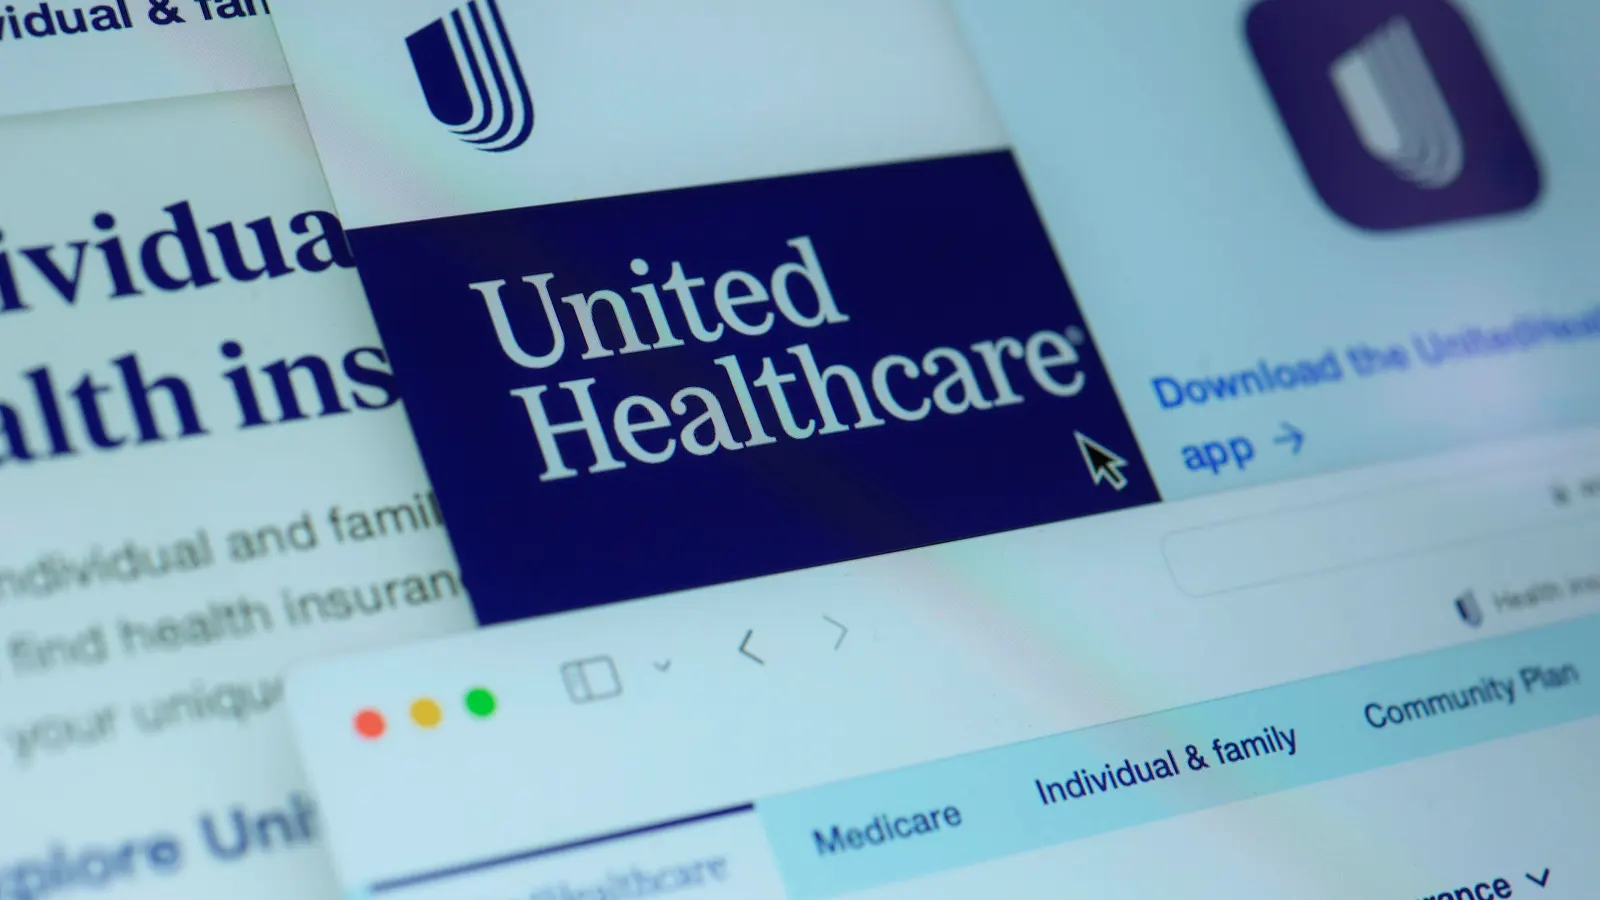 Massive Cyberattack Hits UnitedHealth: What the Recent Data Breach Means for Millions of Americans